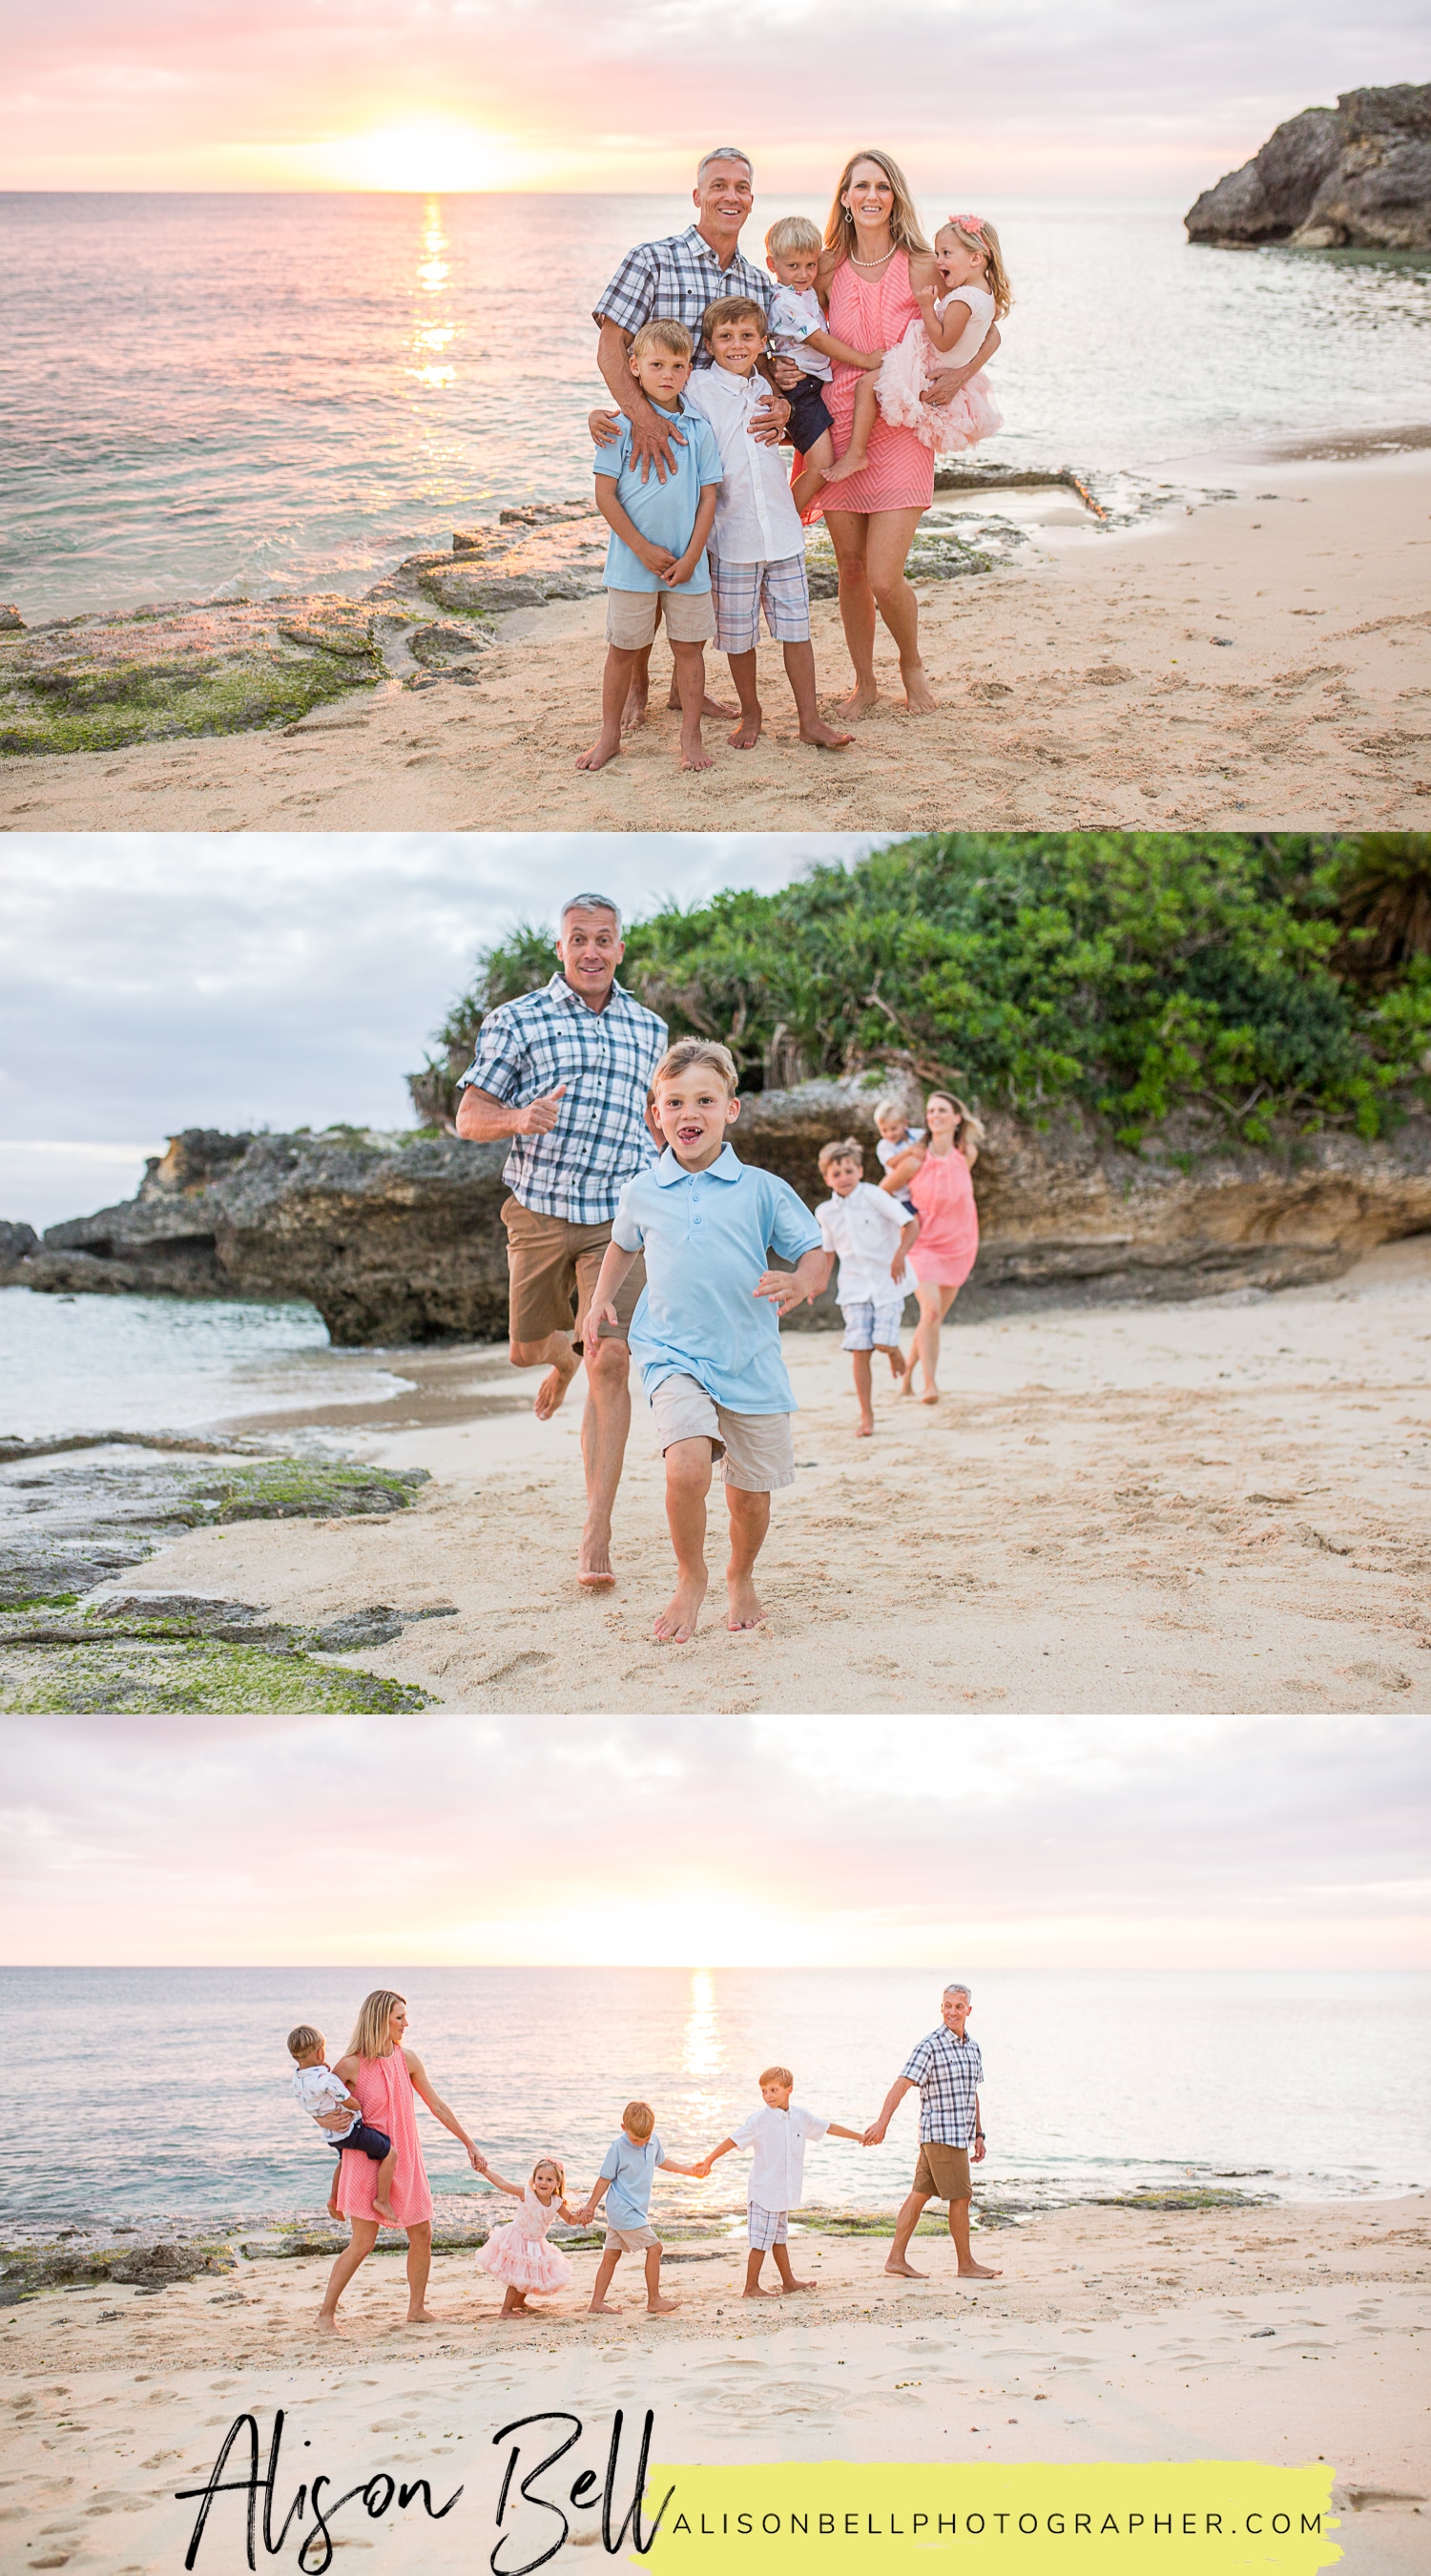 Hawaii family photo outfit ideas by 
Alison Bell, Photographer. #alisonbellphotog alisonbellphotographer.com